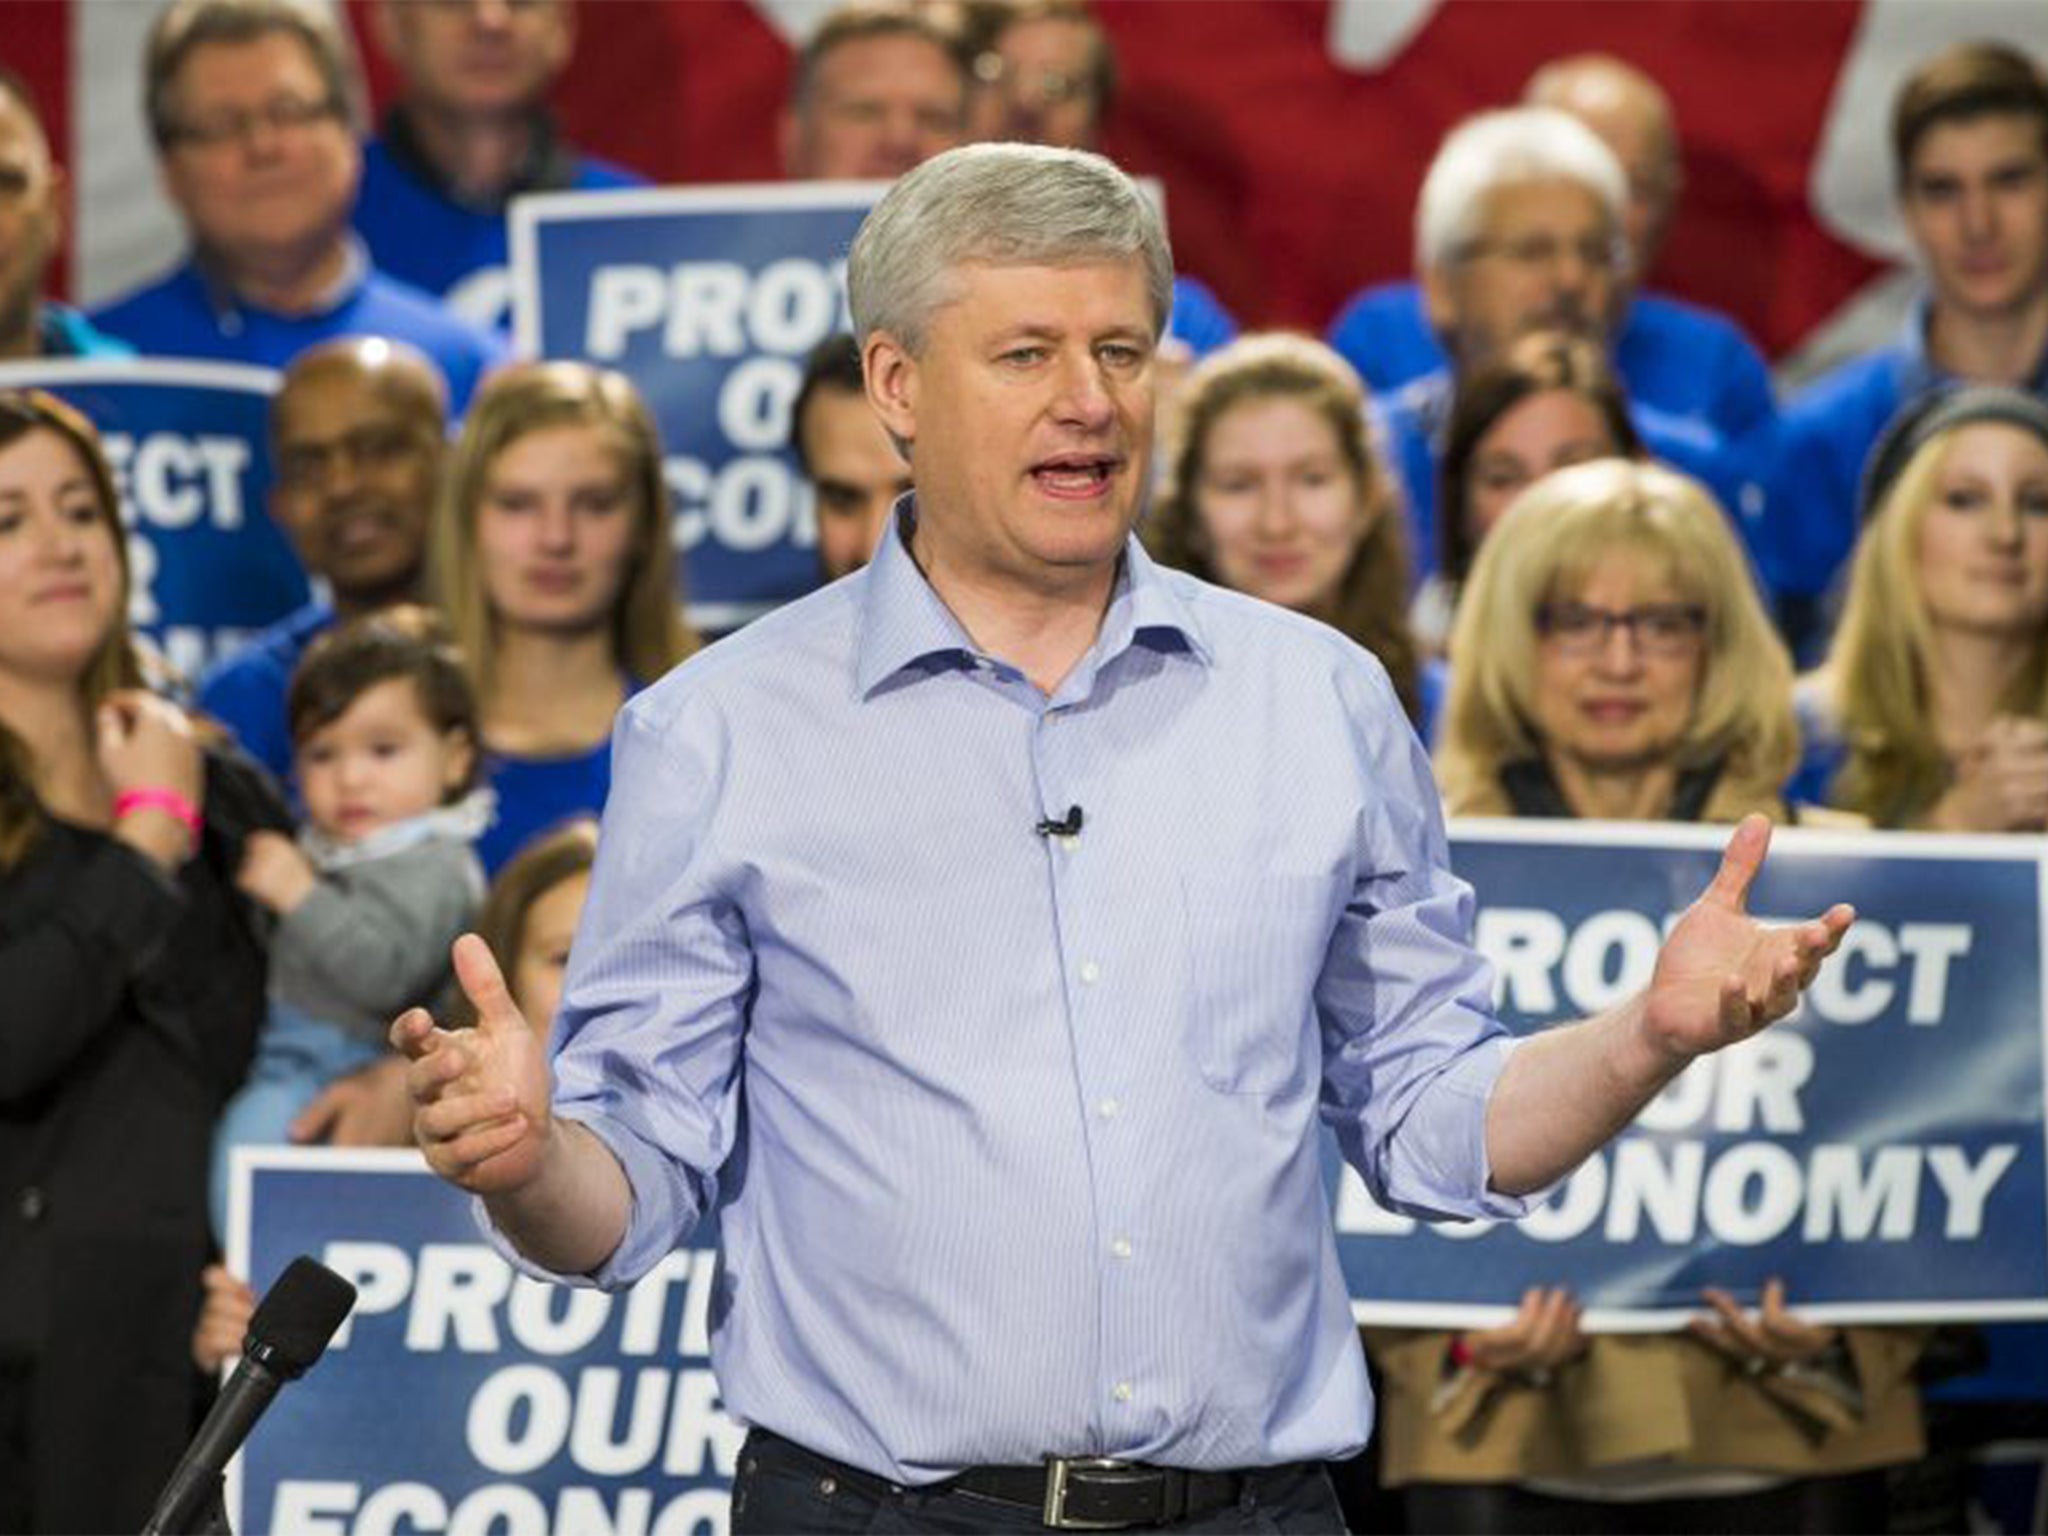 Canada's Prime Minister and Conservative leader Stephen Harper speaks at a rally in Newmarket, Ontario